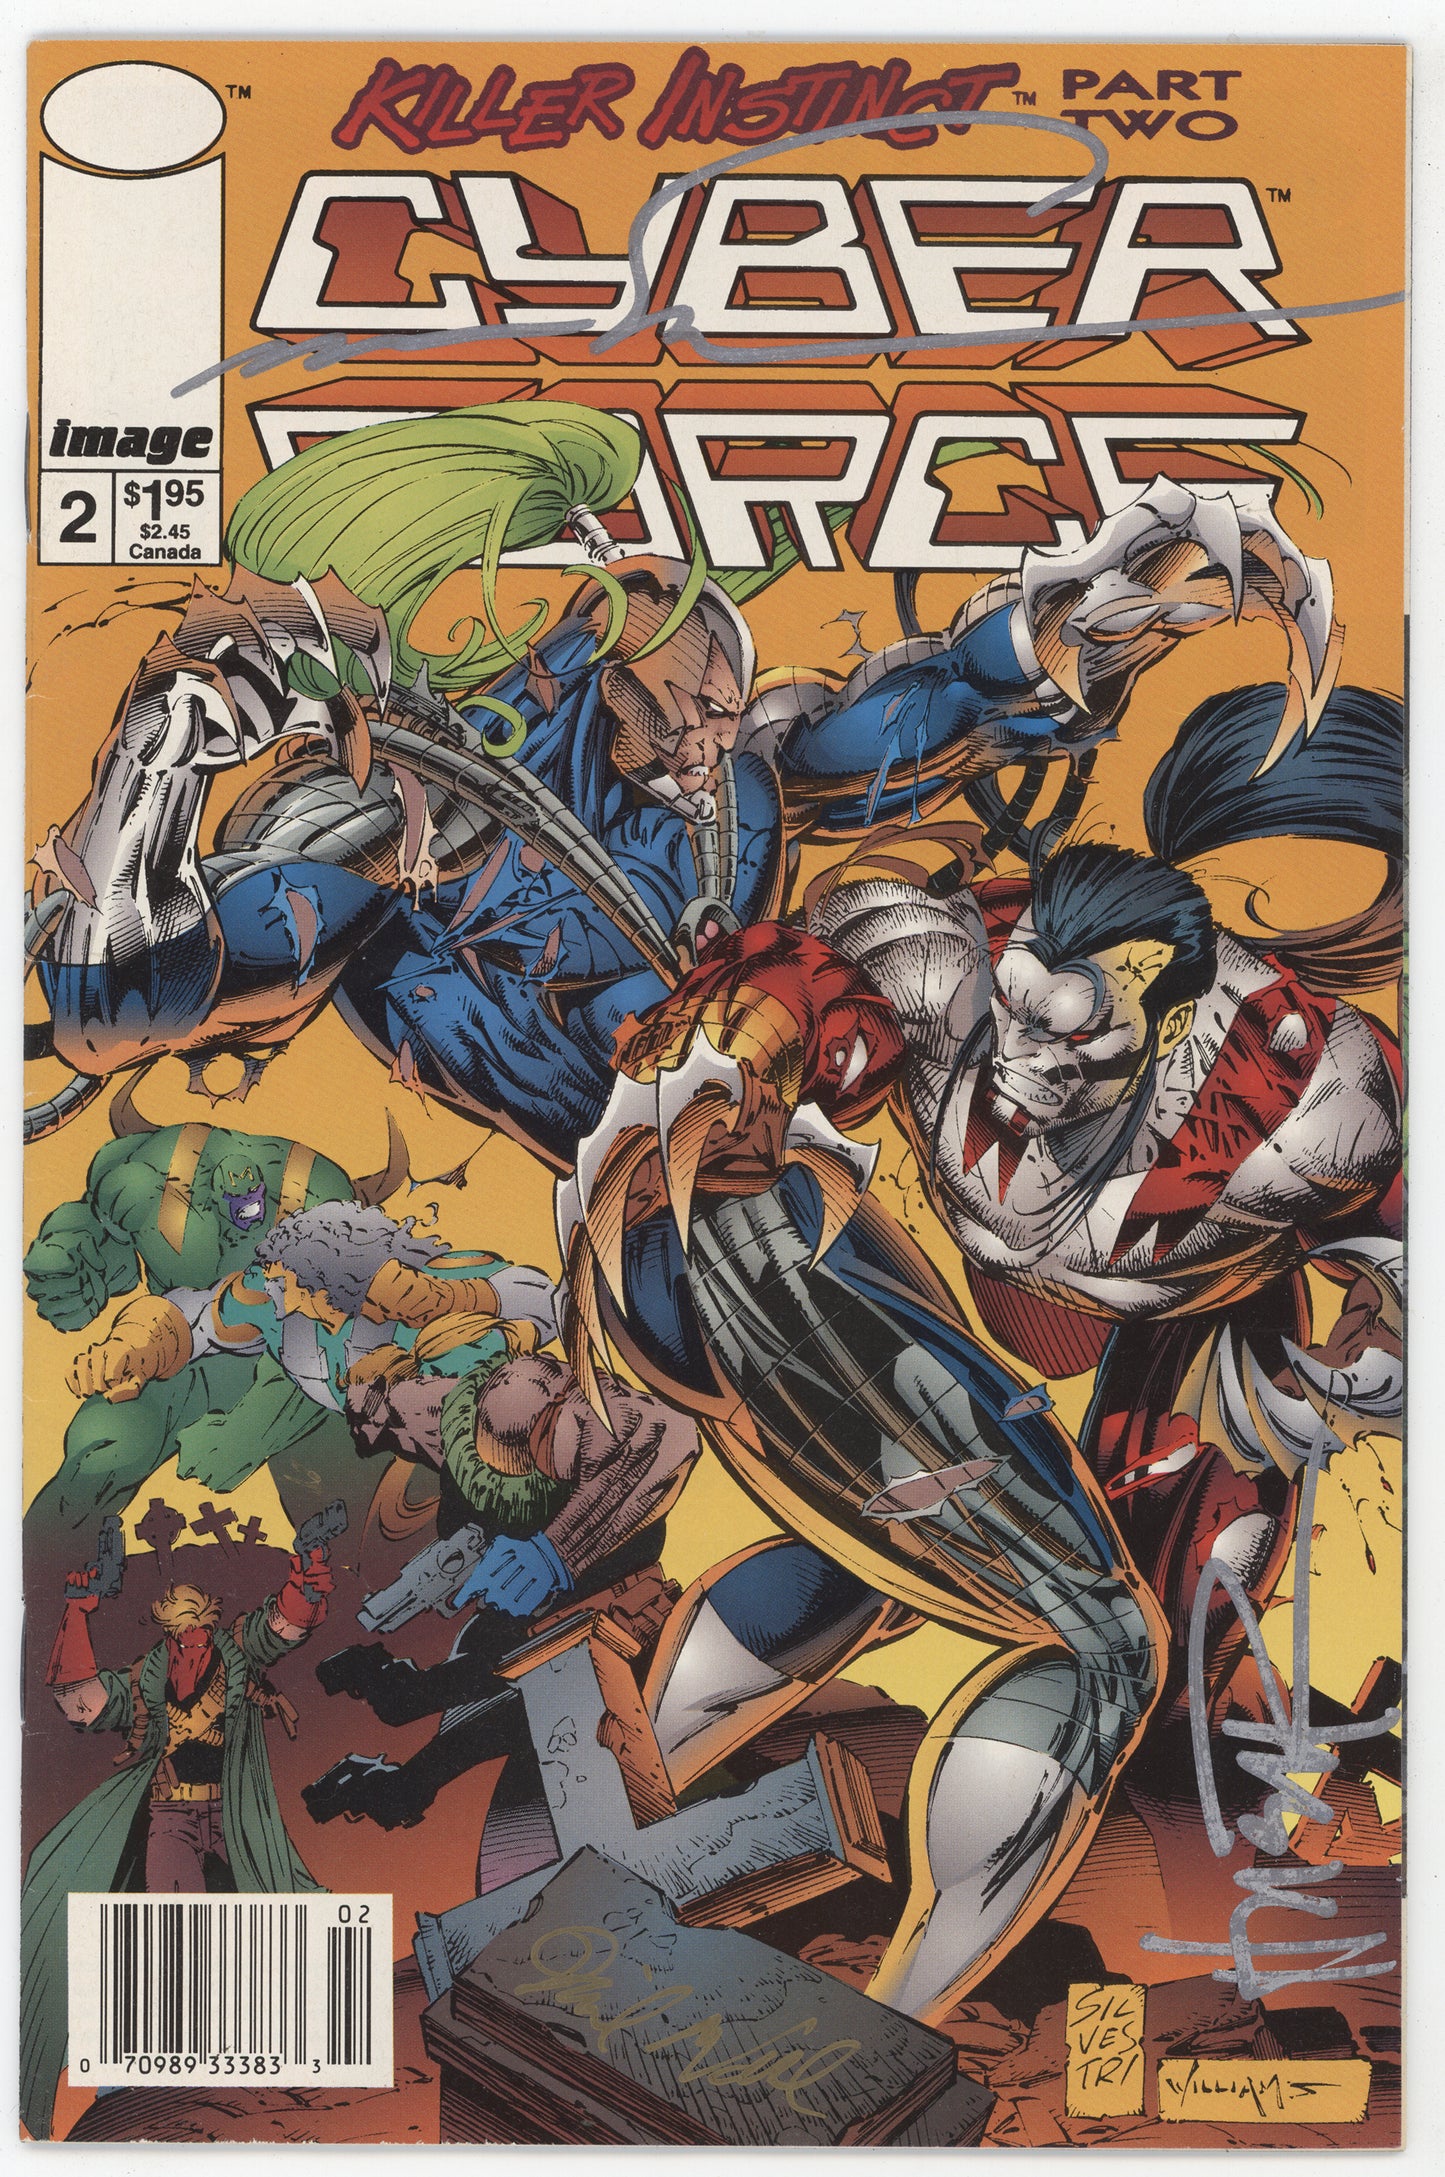 Cyberforce 2 Image 1994 VF Signed 3x Marc Silvestri David Wohl Mike Heisler Newsstand